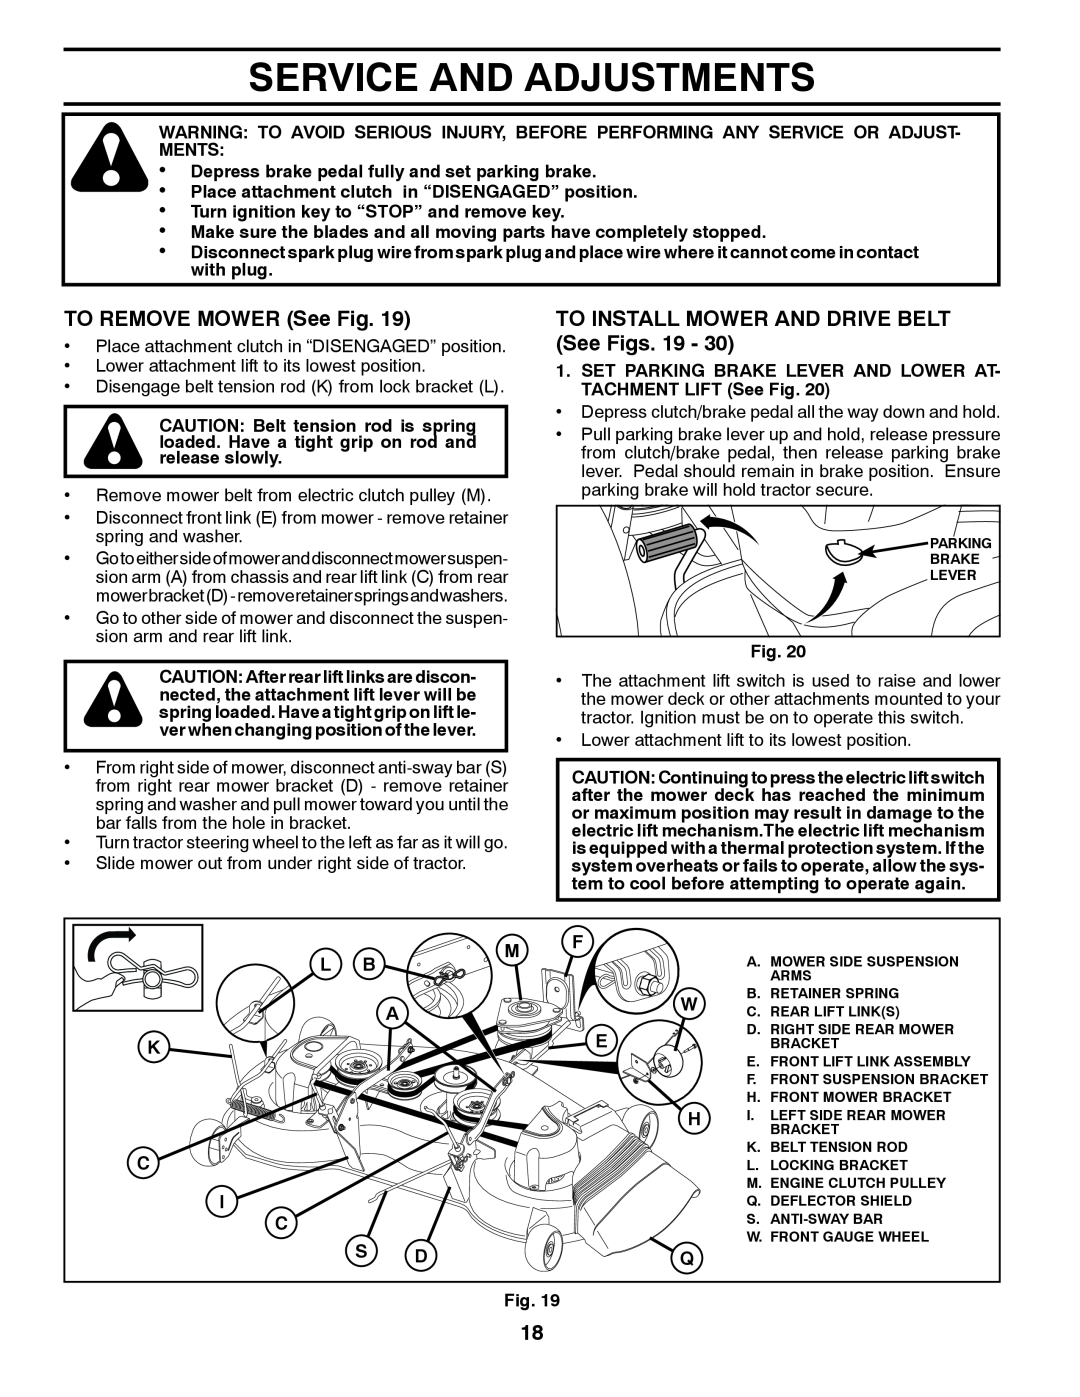 Husqvarna 96045002201 Service And Adjustments, TO REMOVE MOWER See Fig, TO INSTALL MOWER AND DRIVE BELT See Figs. 19 